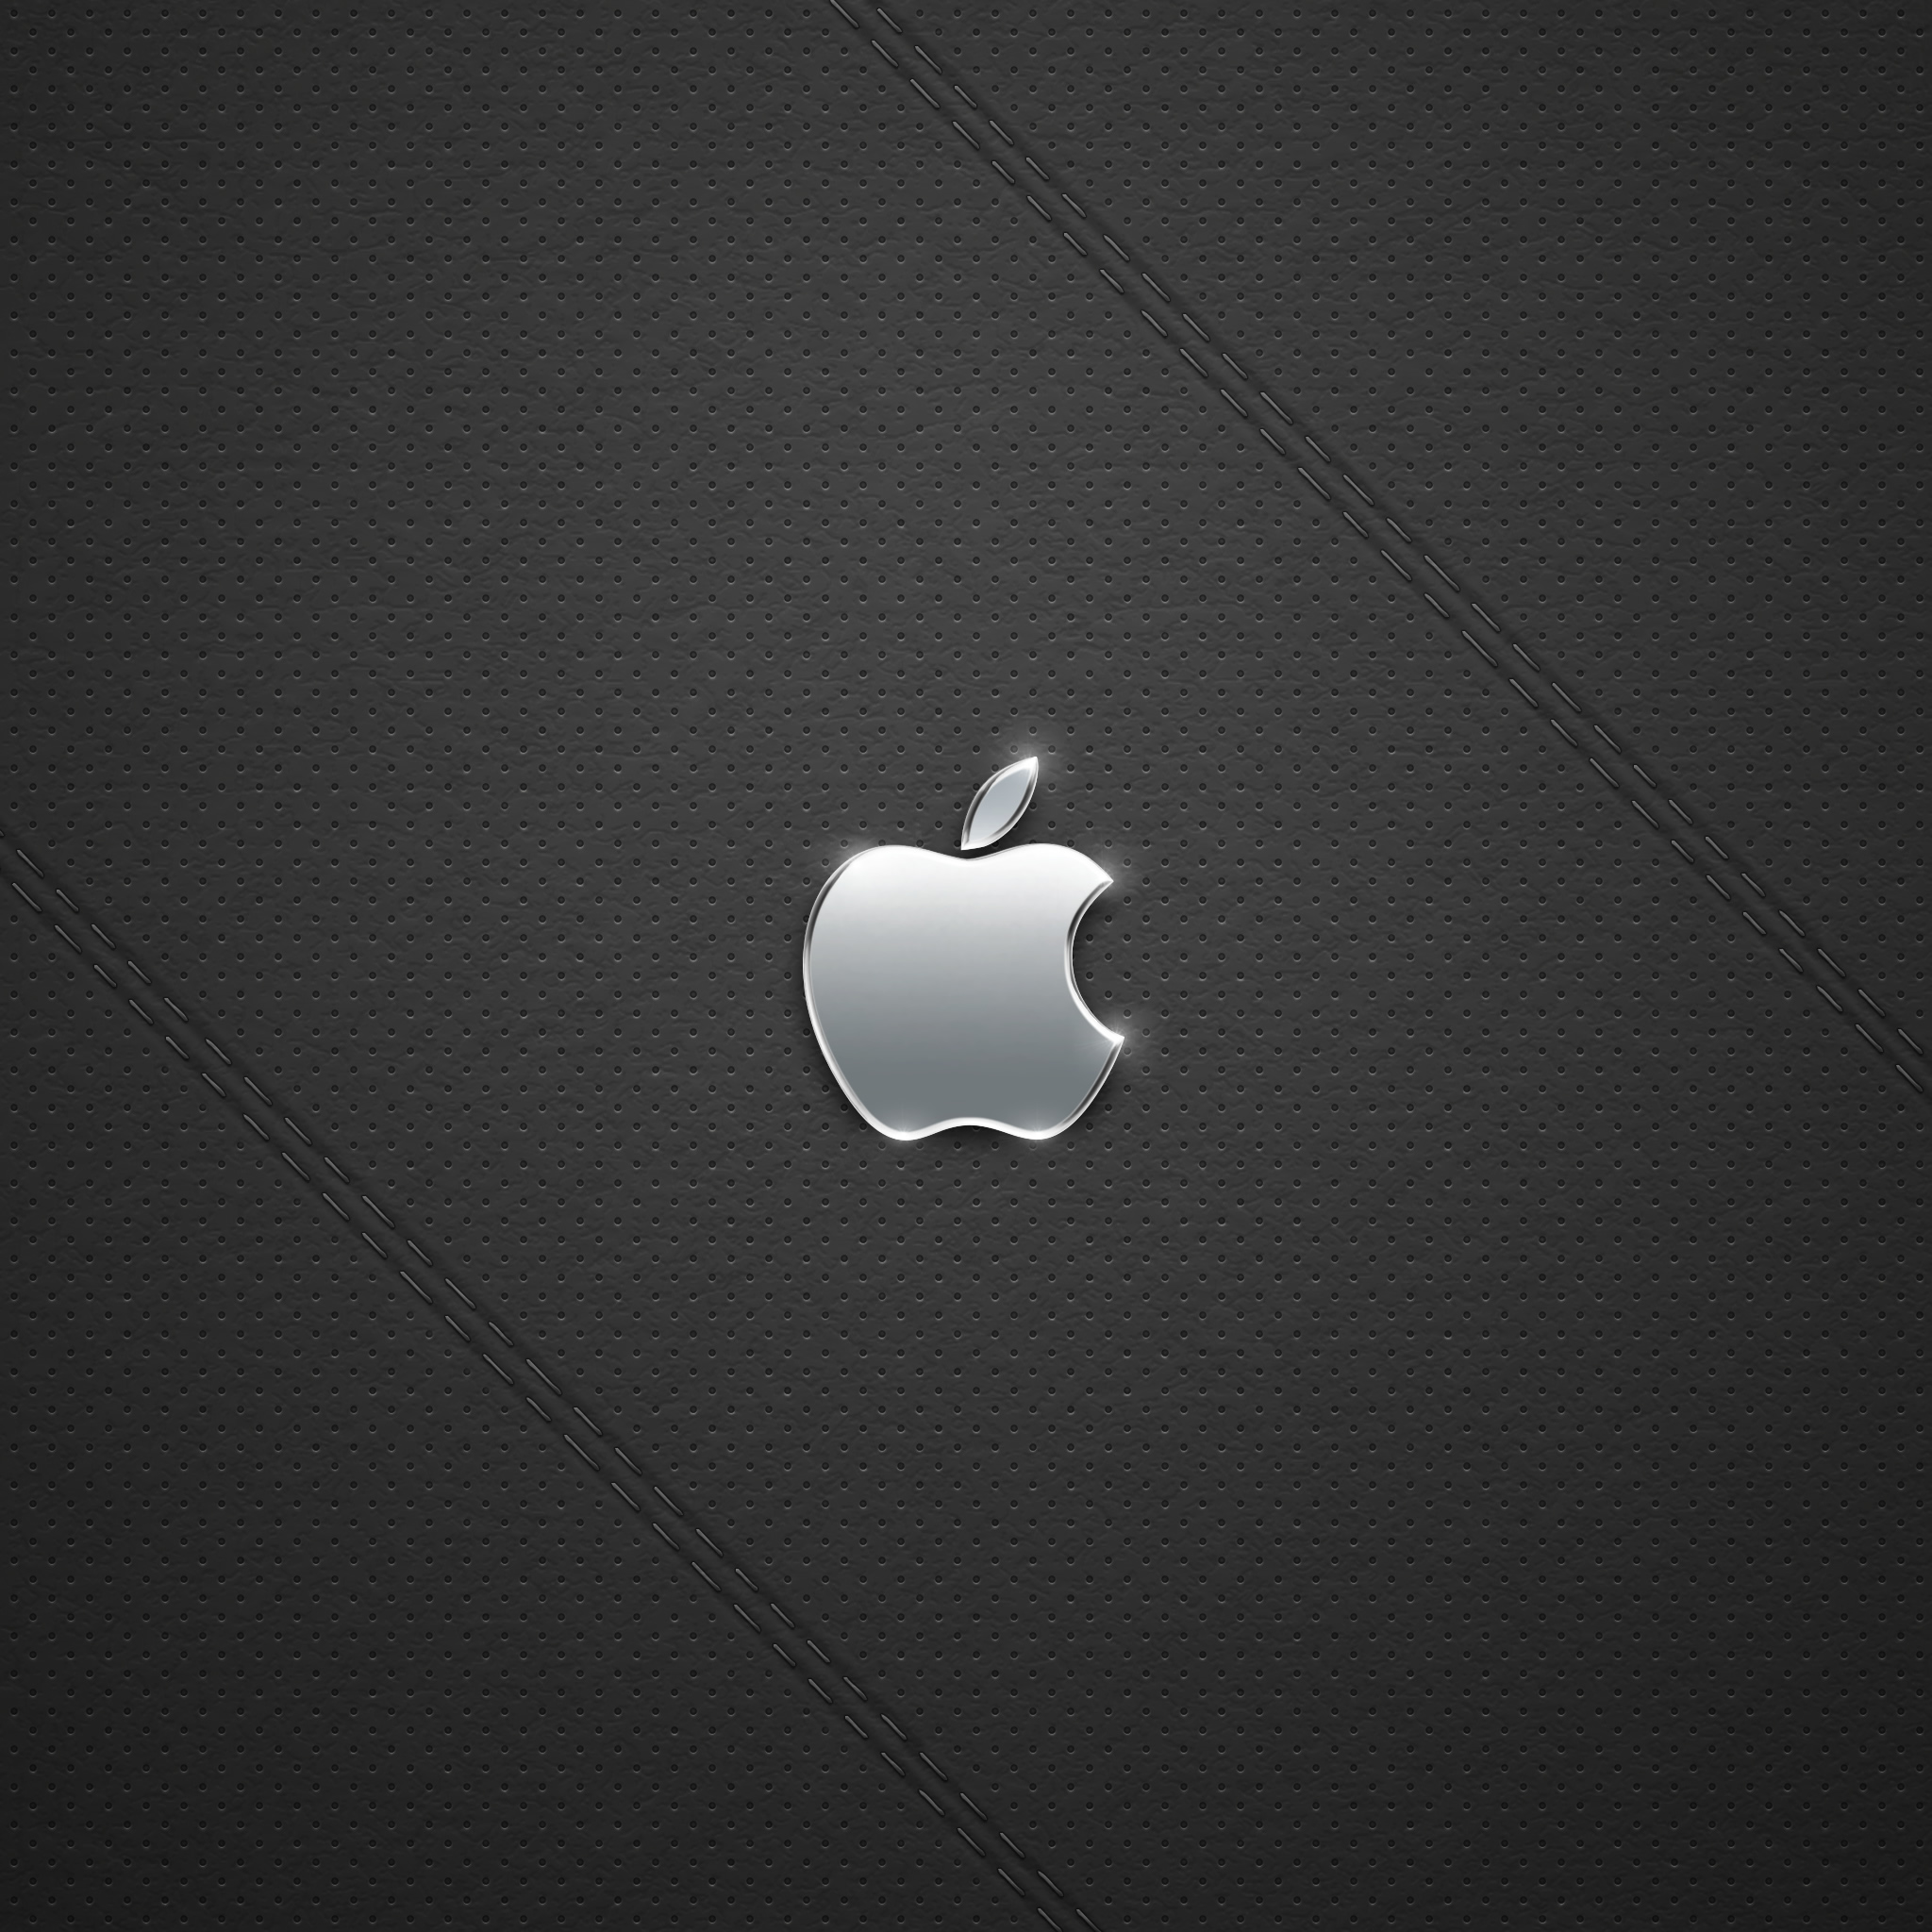 Newest iPad 3 wallpapers Apple Logo Wallpapers Leather Apple Logo